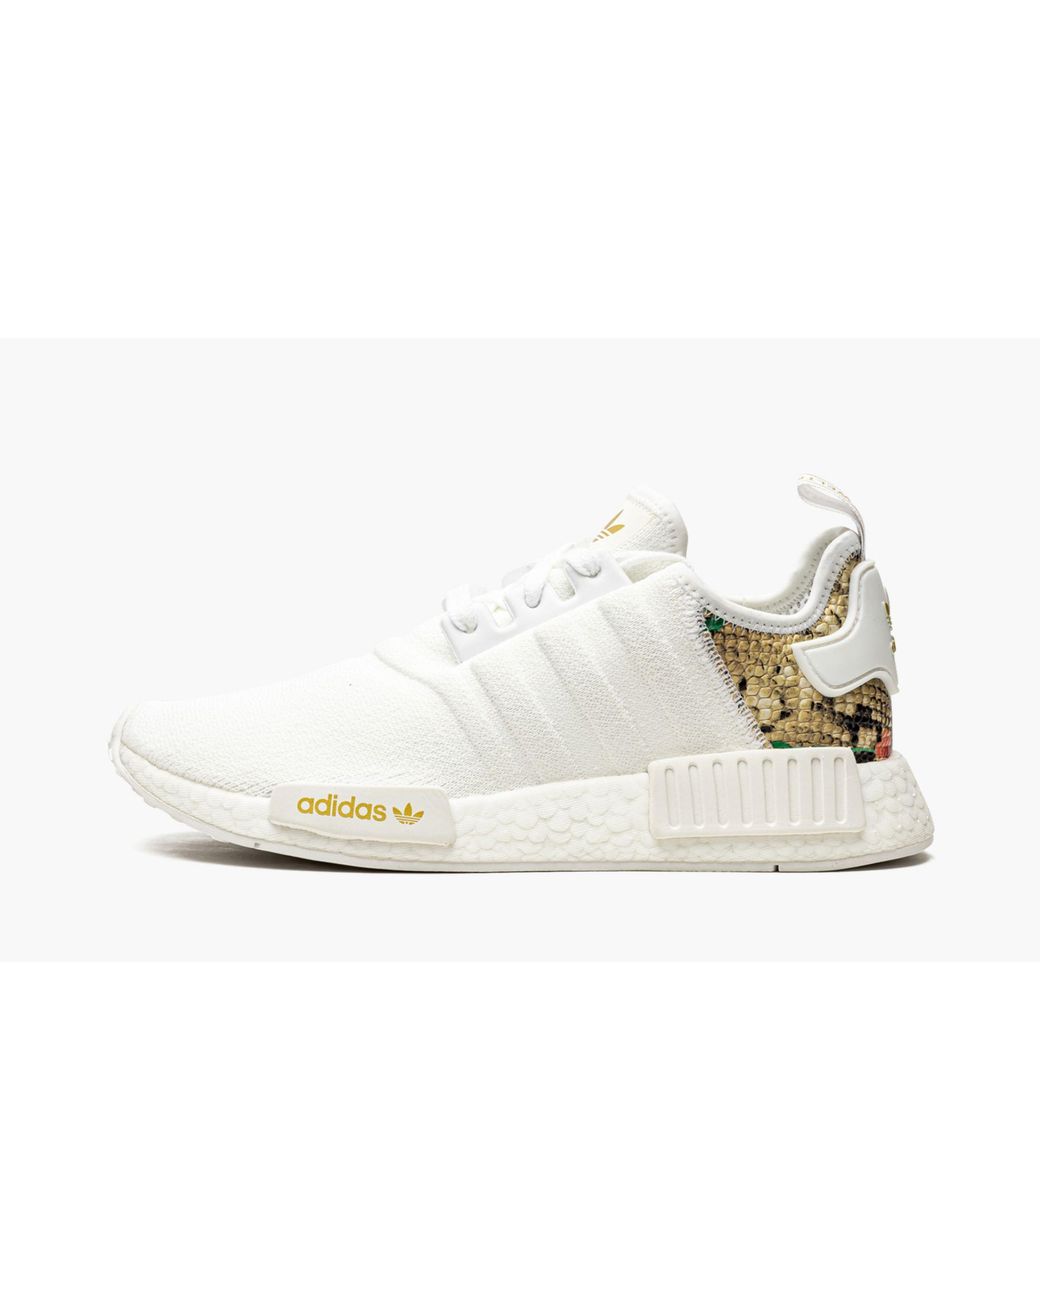 adidas Originals Nmd R1 S Casual Running Shoe Fx0826 Size 8 in White | Lyst